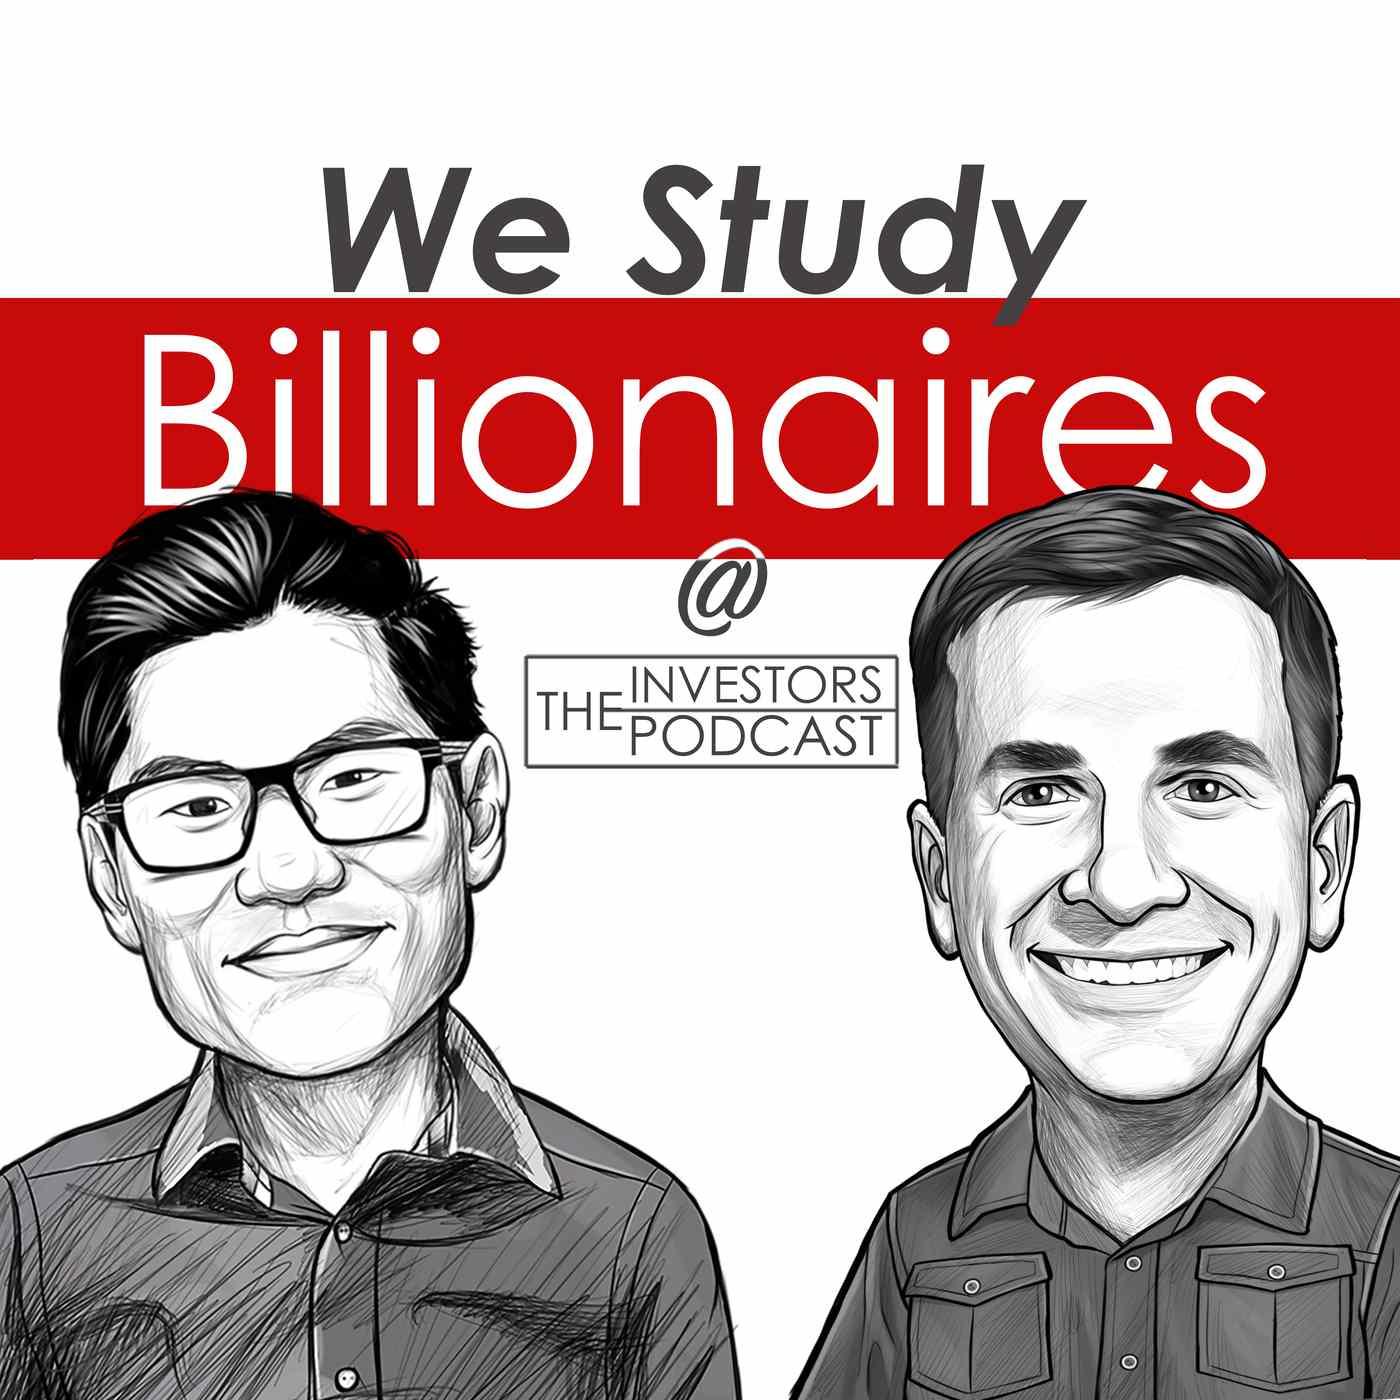 Best Investing Podcasts: Top-rated investing podcast with lively format and useful resources.